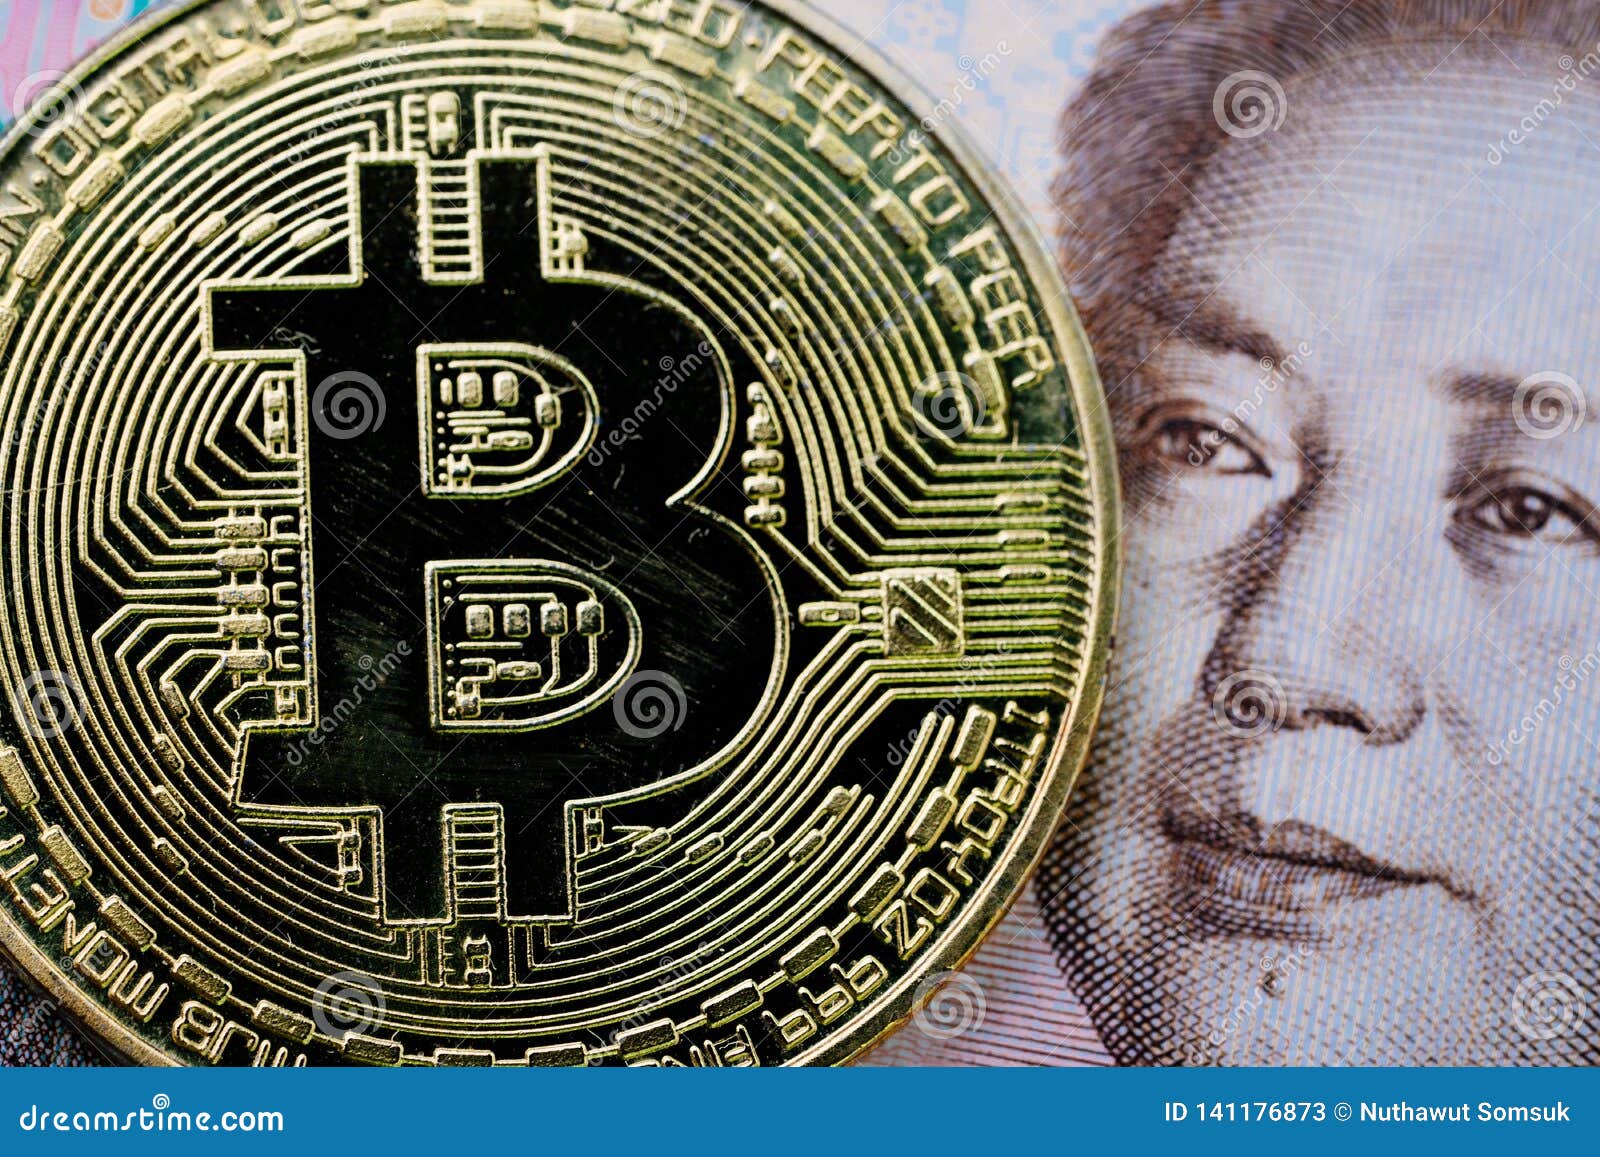 Bitcoin Crypto Currency, Digital Money In China Concept ...